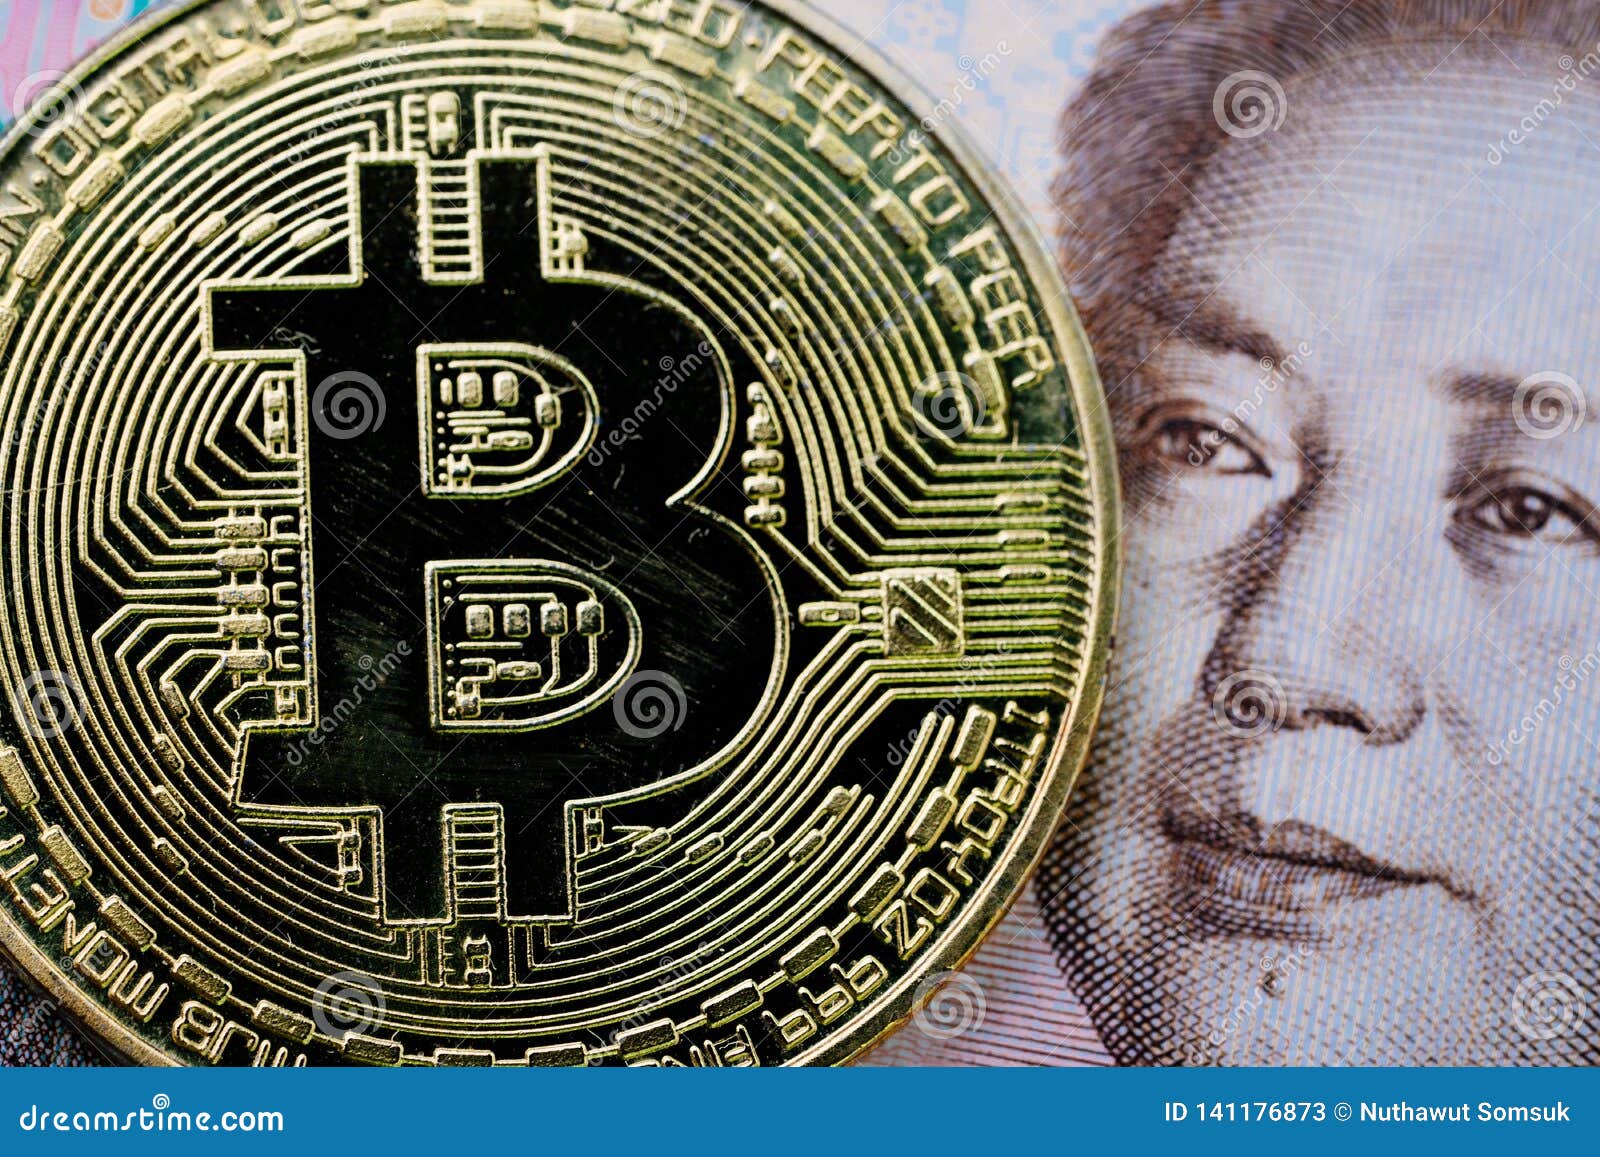 Bitcoin Crypto Currency, Digital Money In China Concept ...